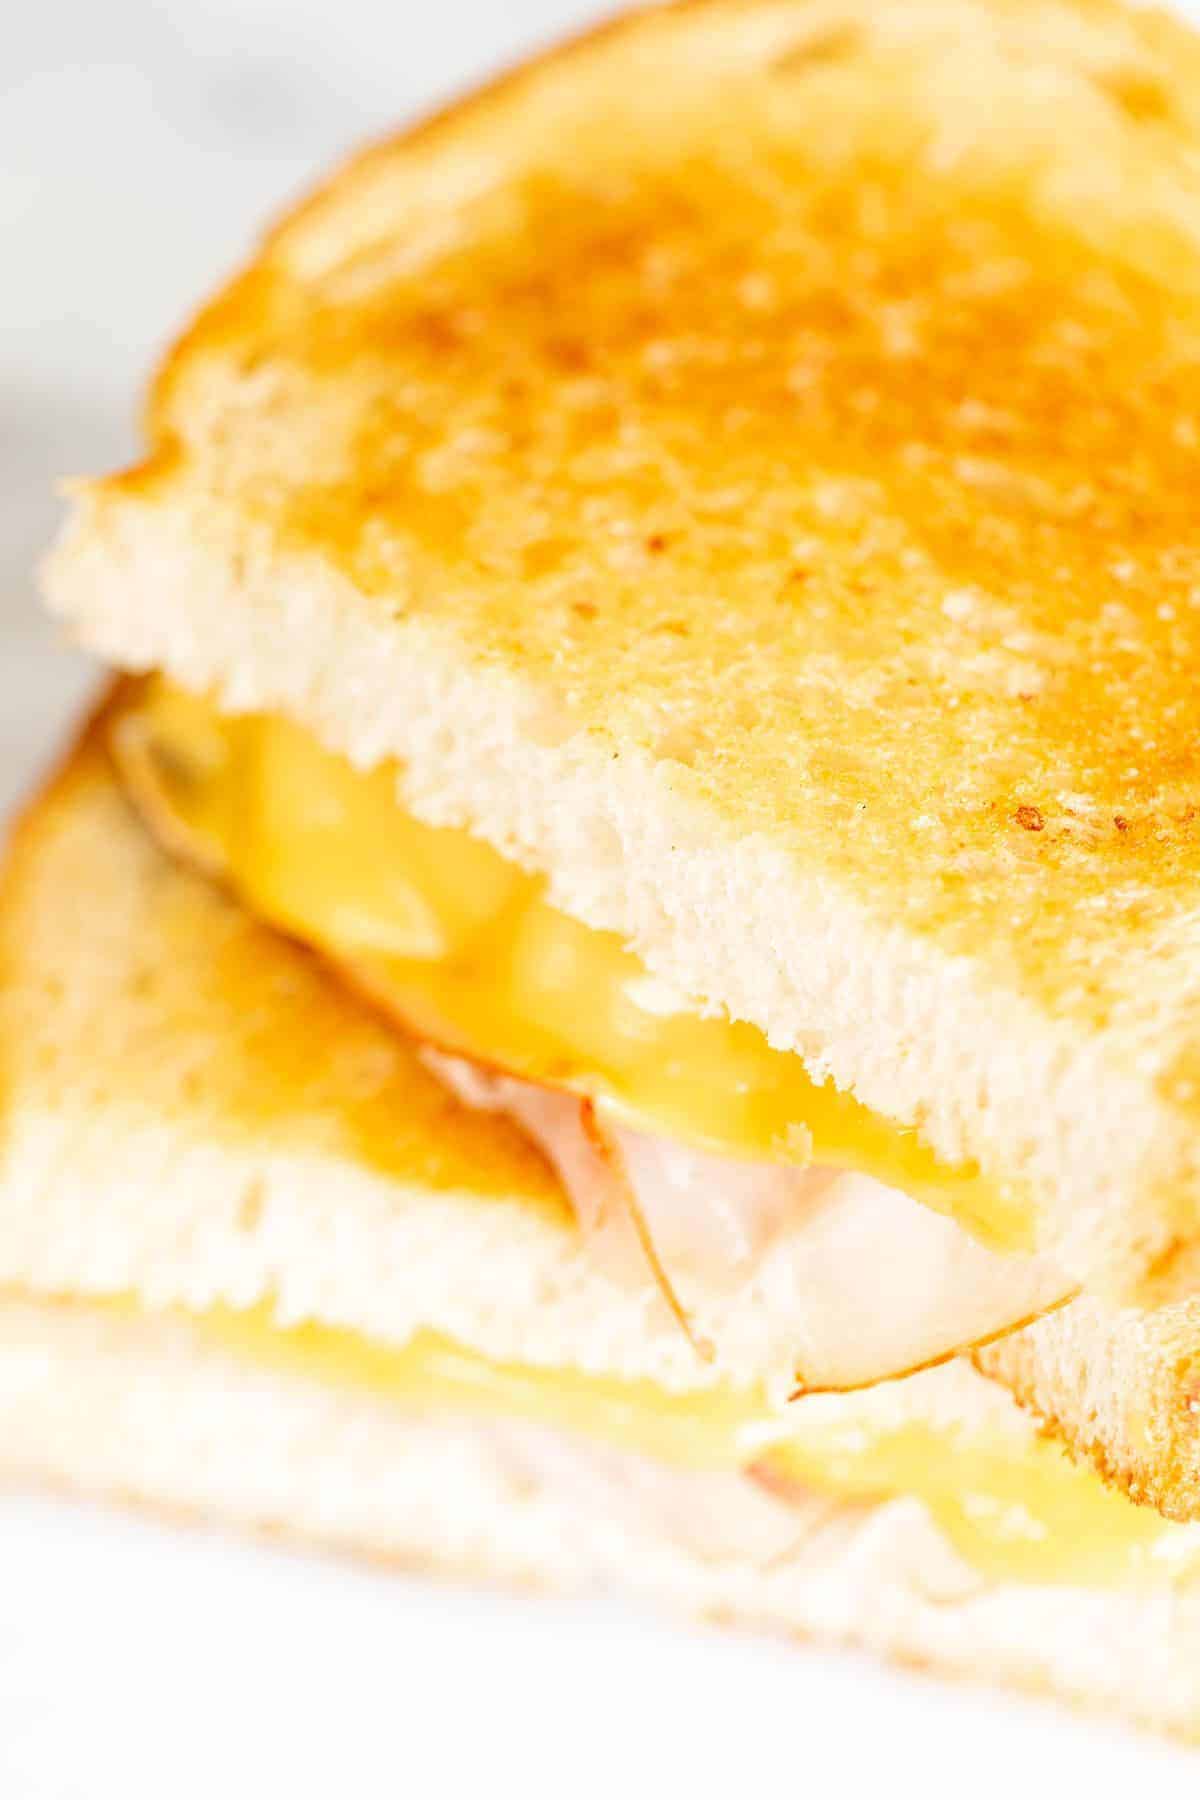 sliced grilled ham and cheese on white bread.